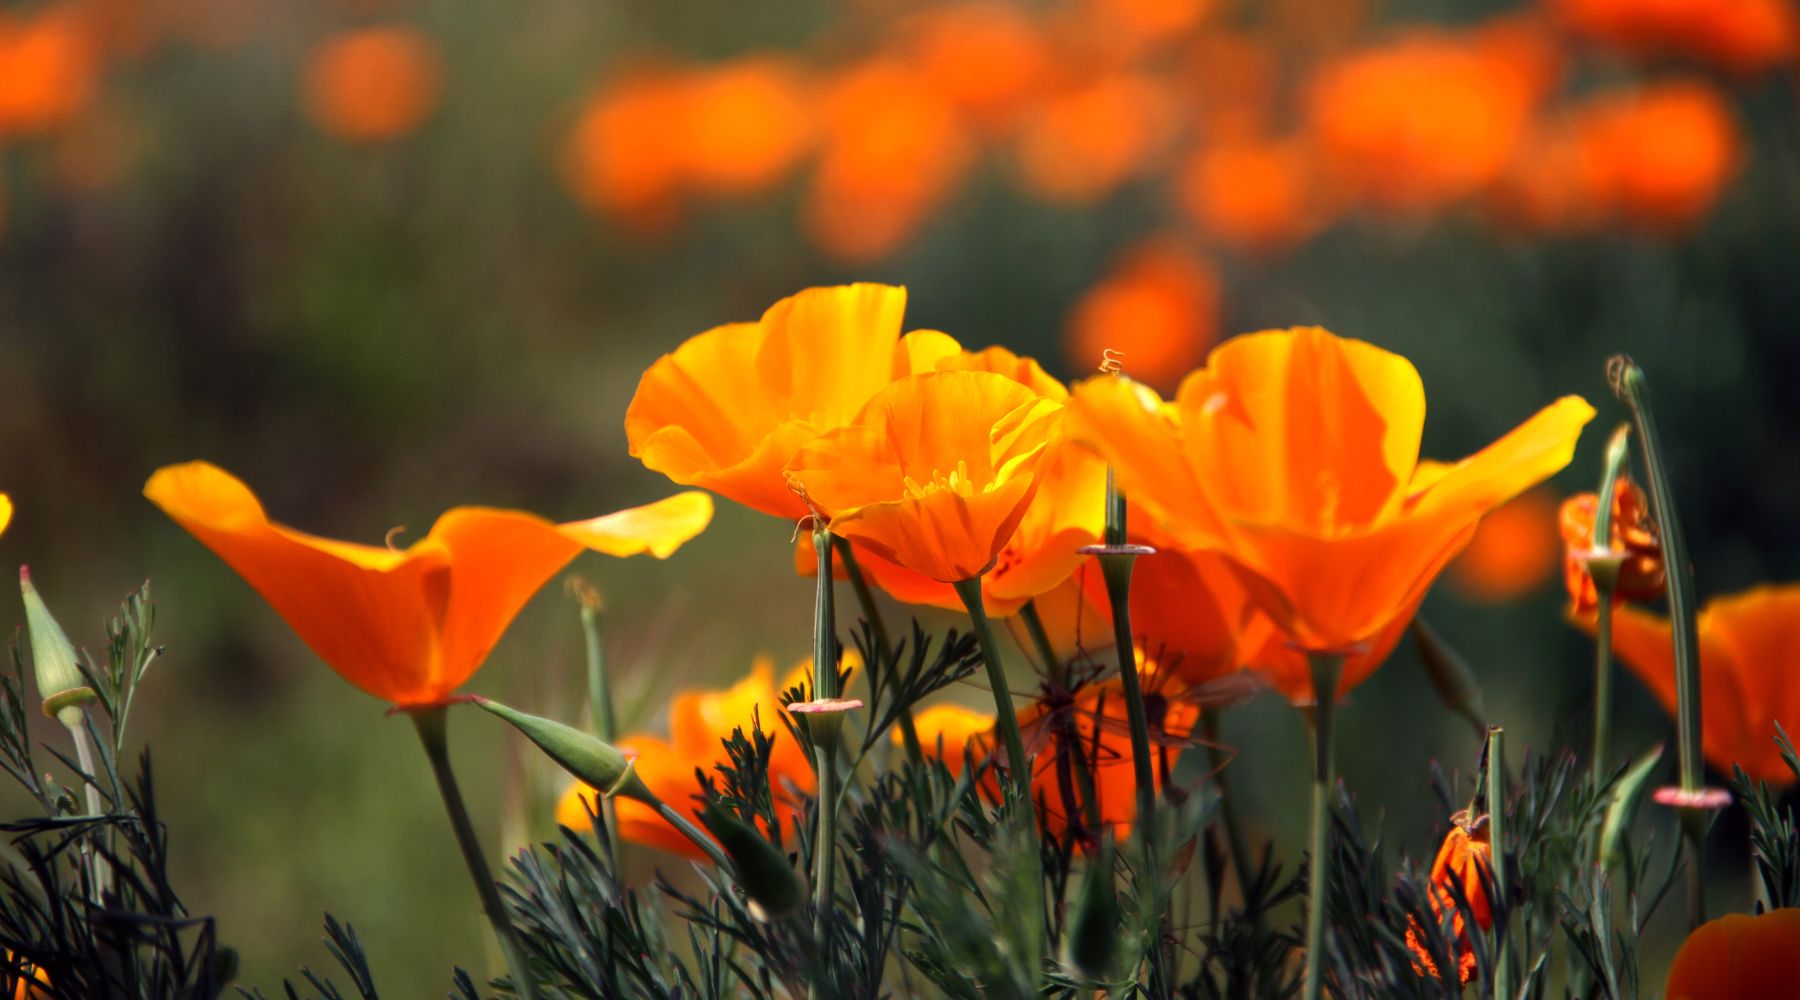 California poppies - why are they the state flower?